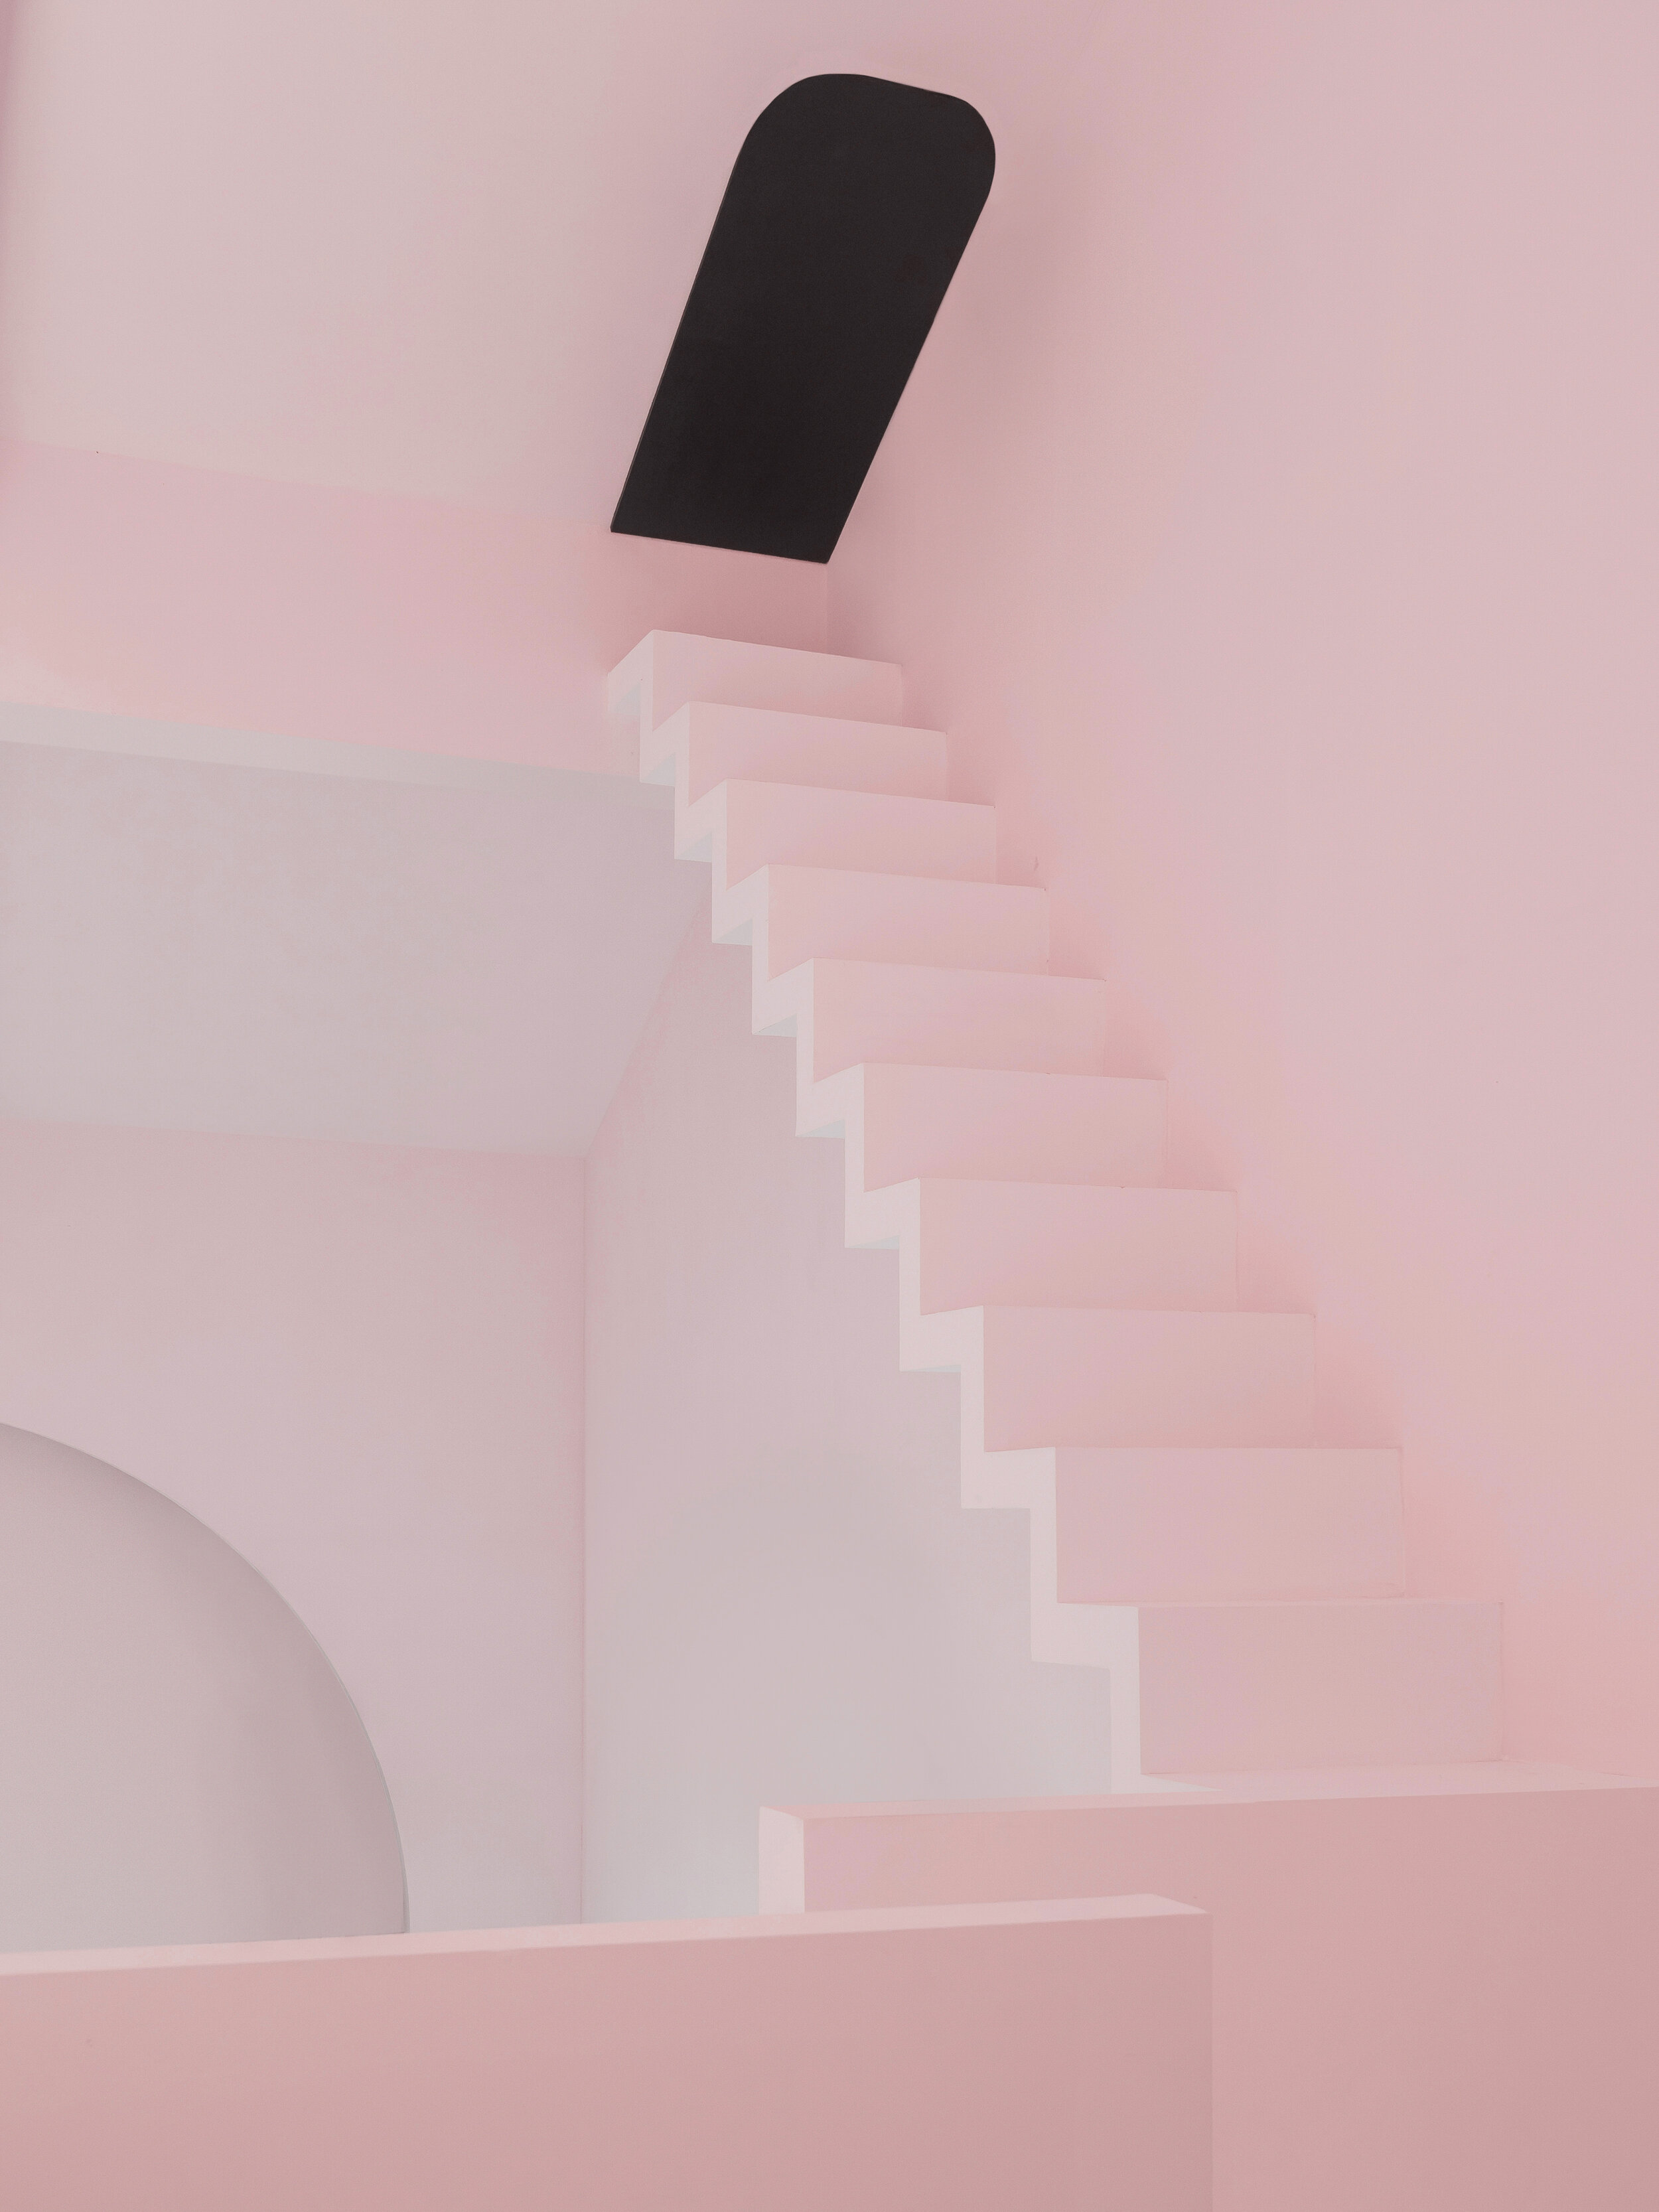 Dream - Anti-gravitational stairs leading to doors in the ceiling @张超 L 20181113-14.jpg